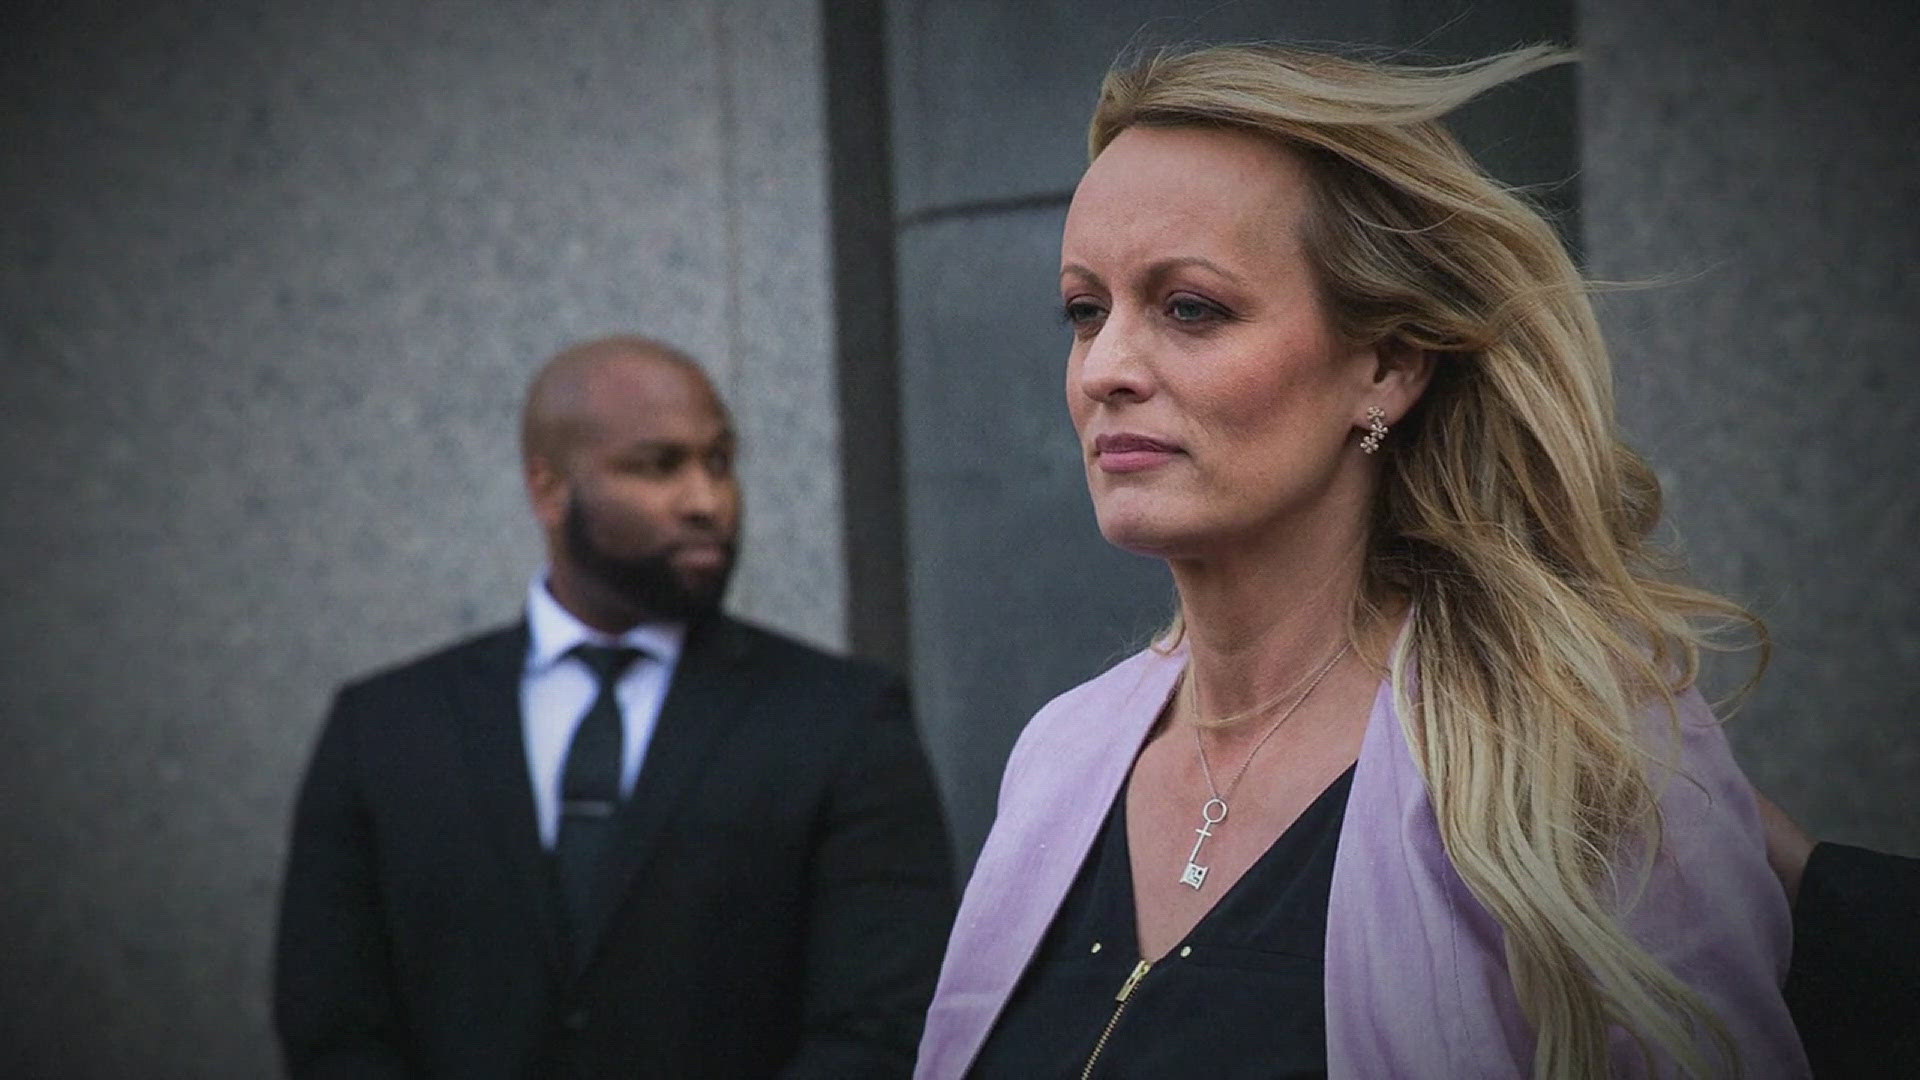 Defense attorneys had sought a mistrial based on Stormy Daniels' testimony.